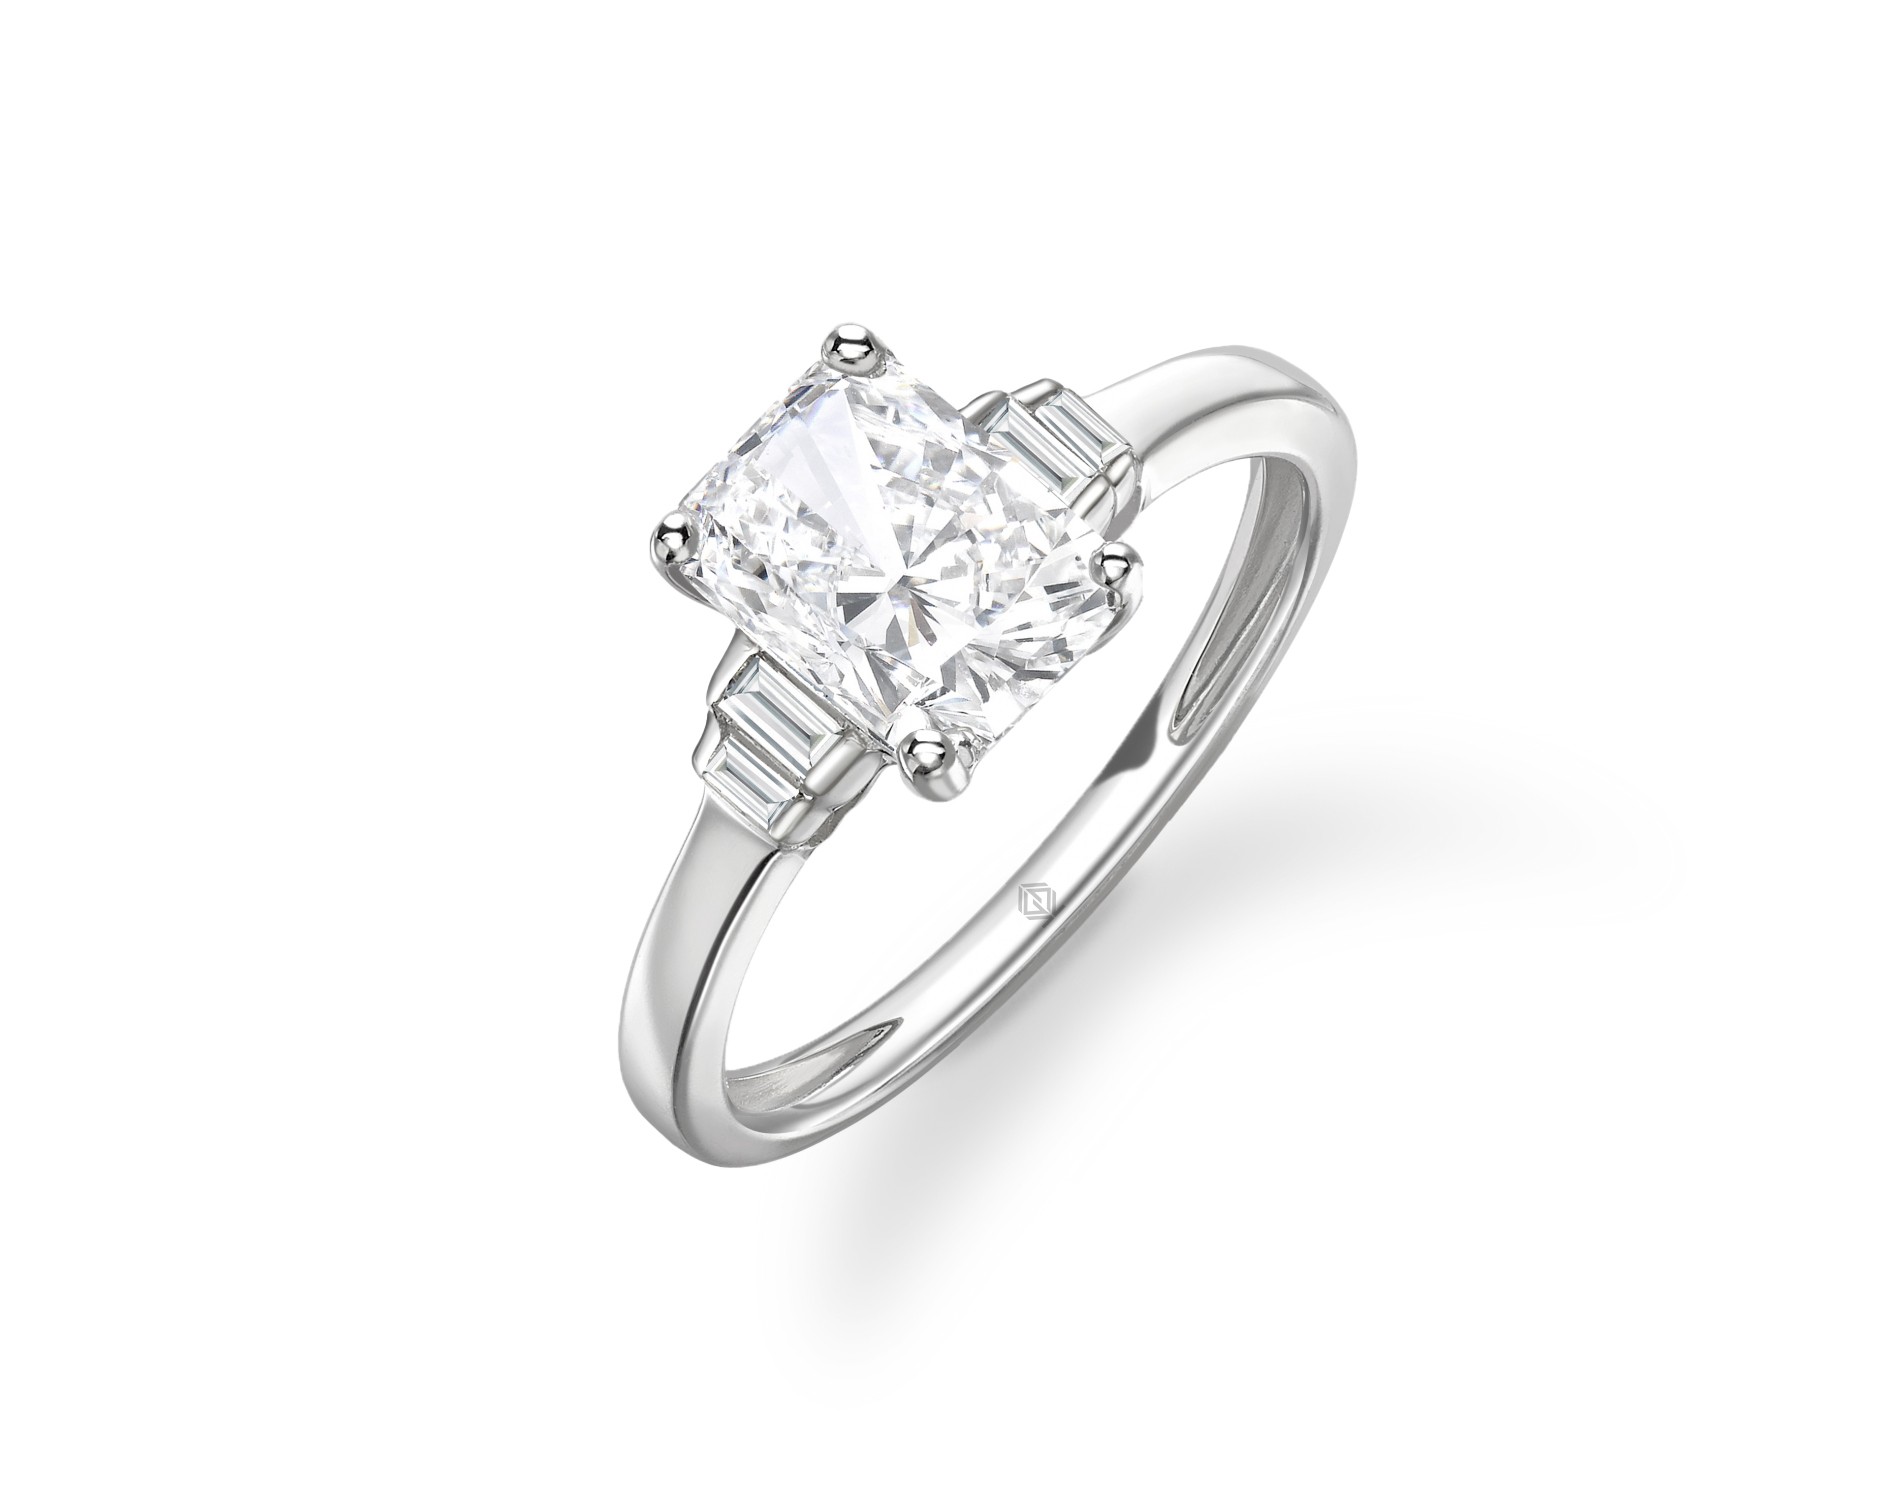 18K WHITE GOLD RADIANT CUT DIAMOND RING WITH BAGUETTES CUT SIDE STONES